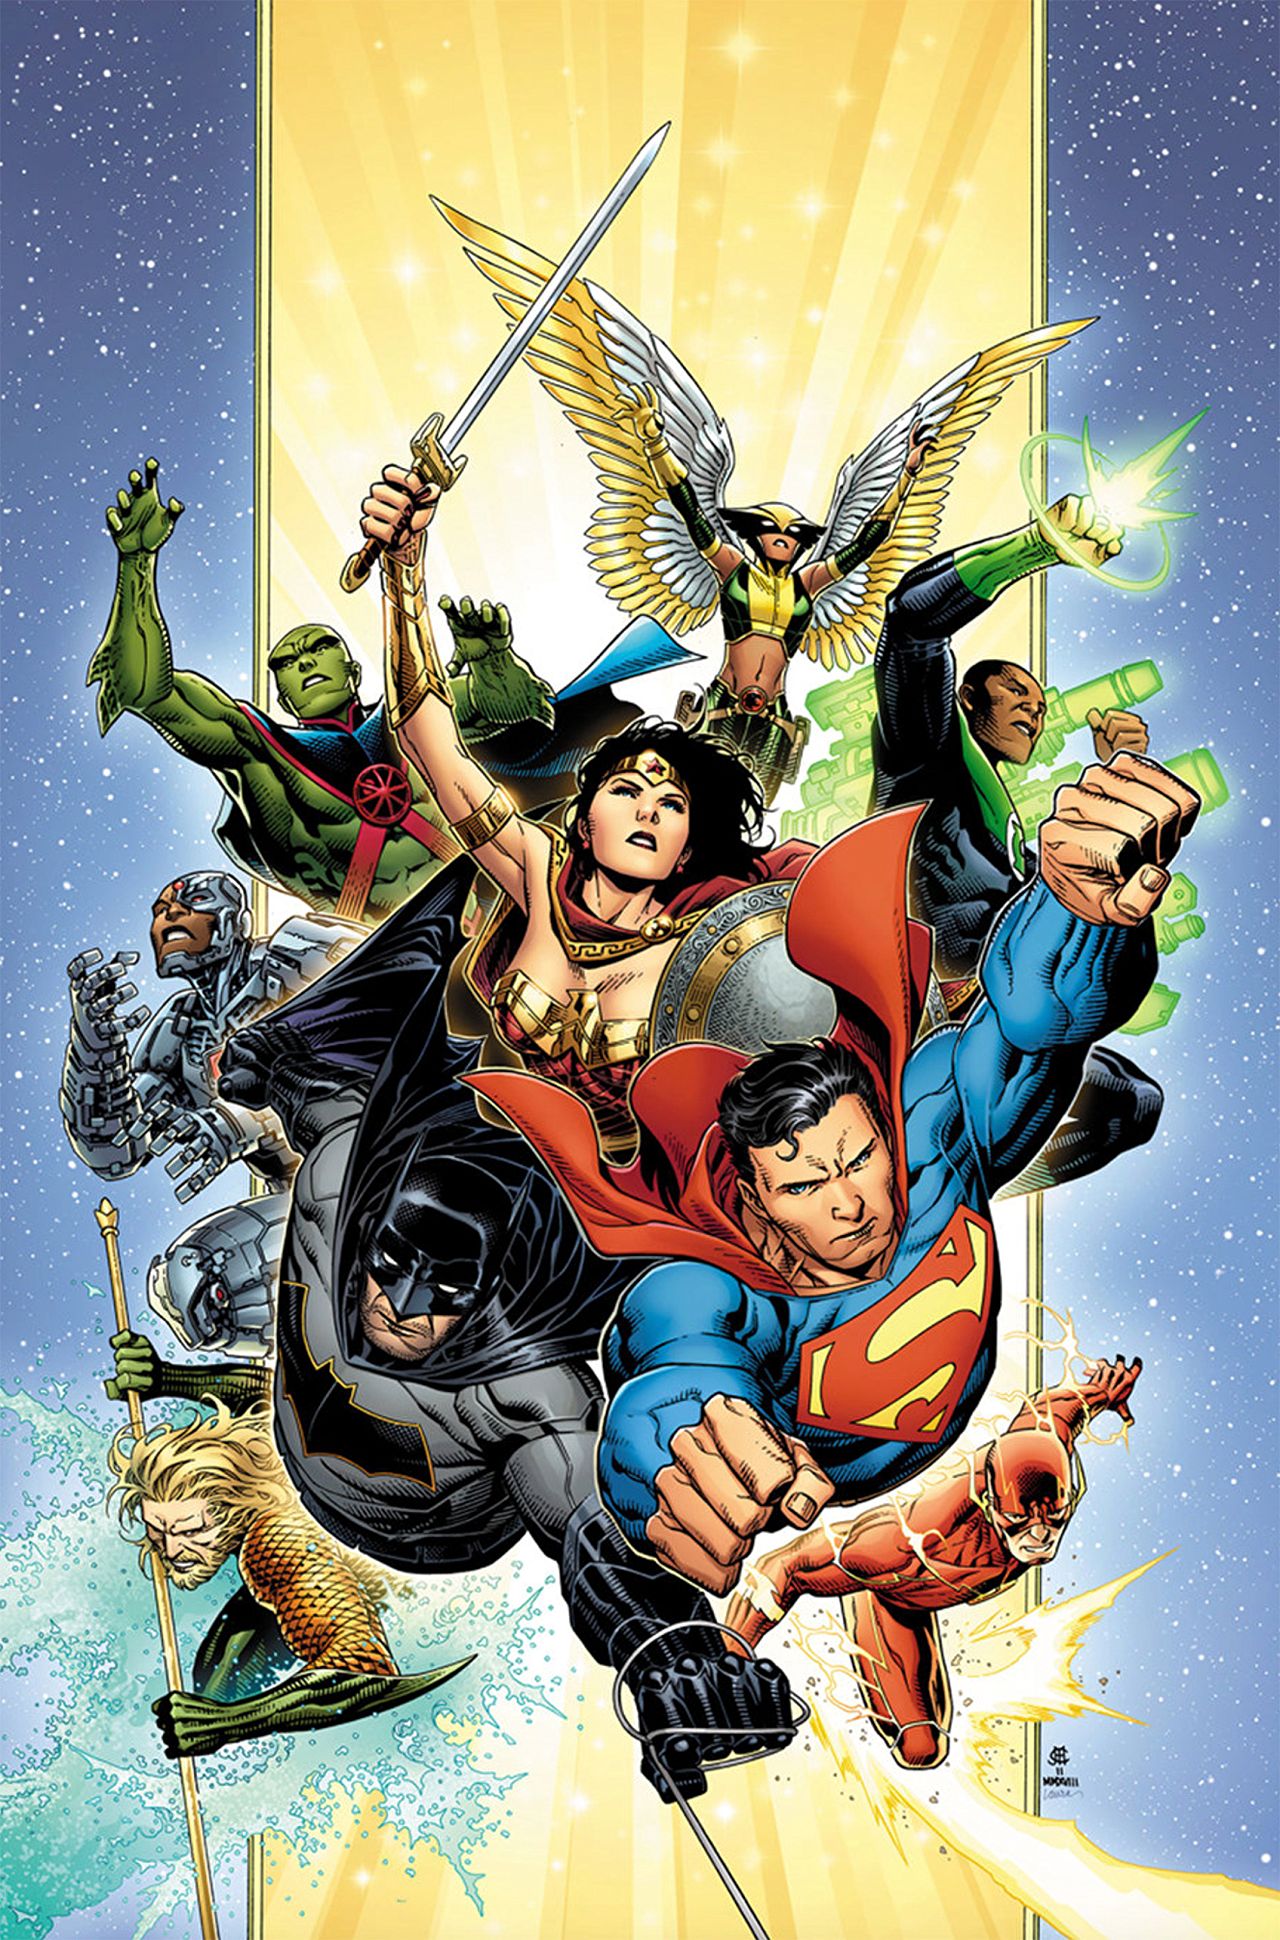 Justice League Vol. 1: The Totality Review